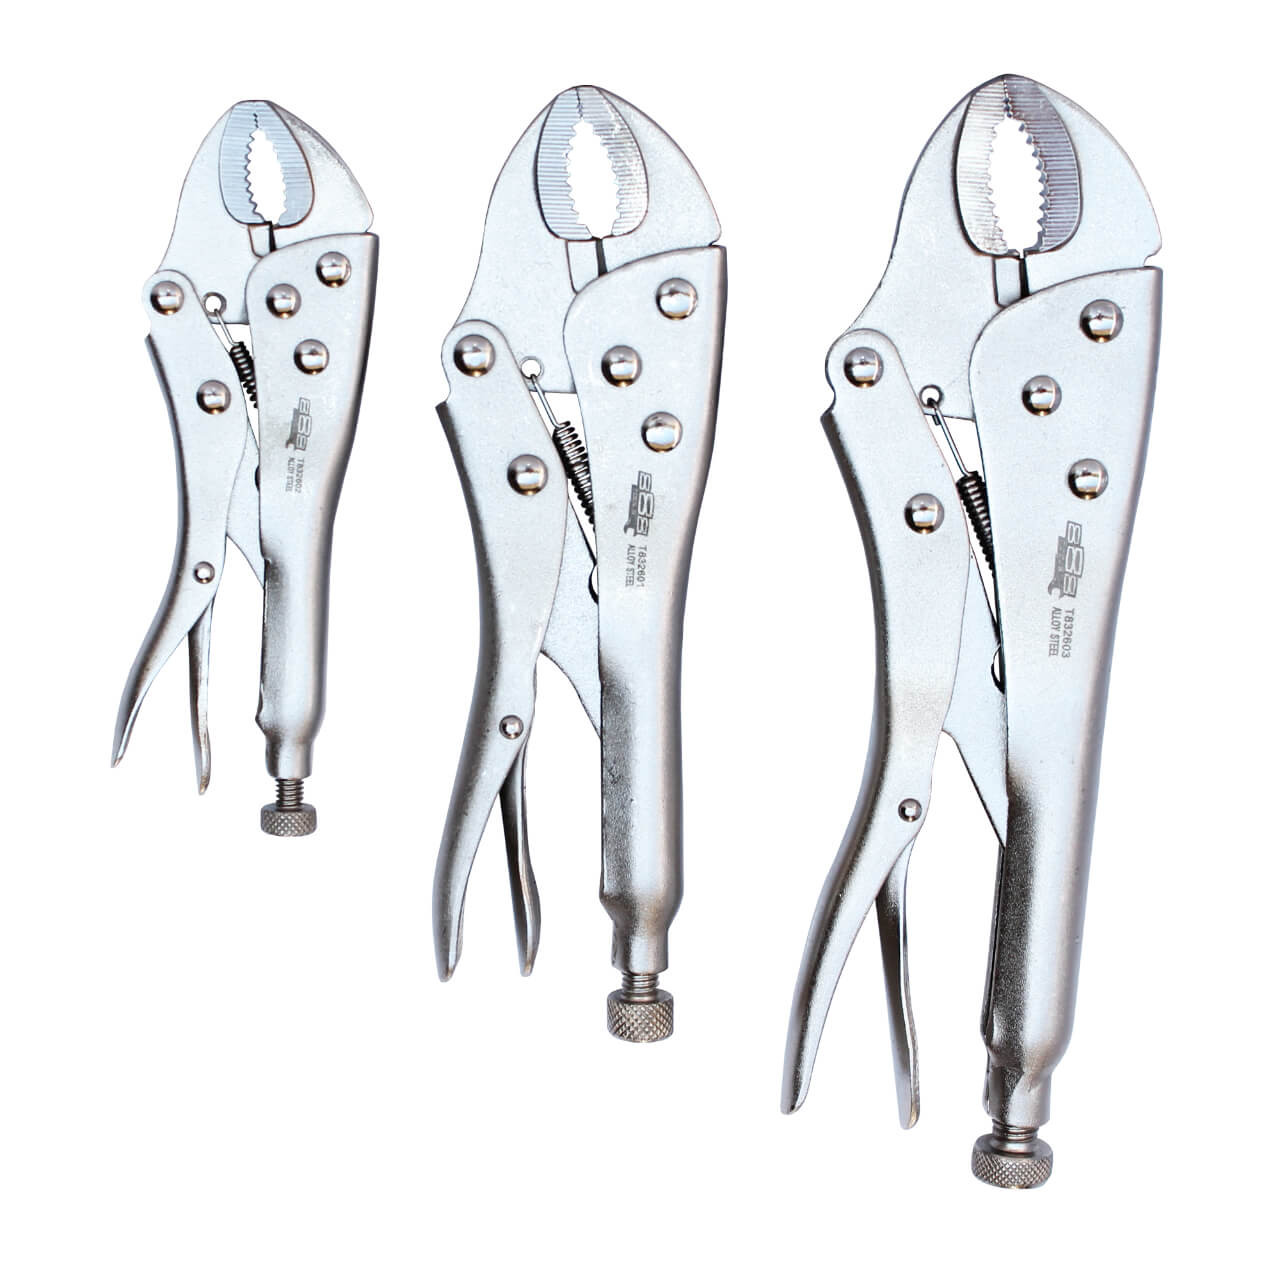 888 Tools Curved Jaw Locking Plier Set 3pce